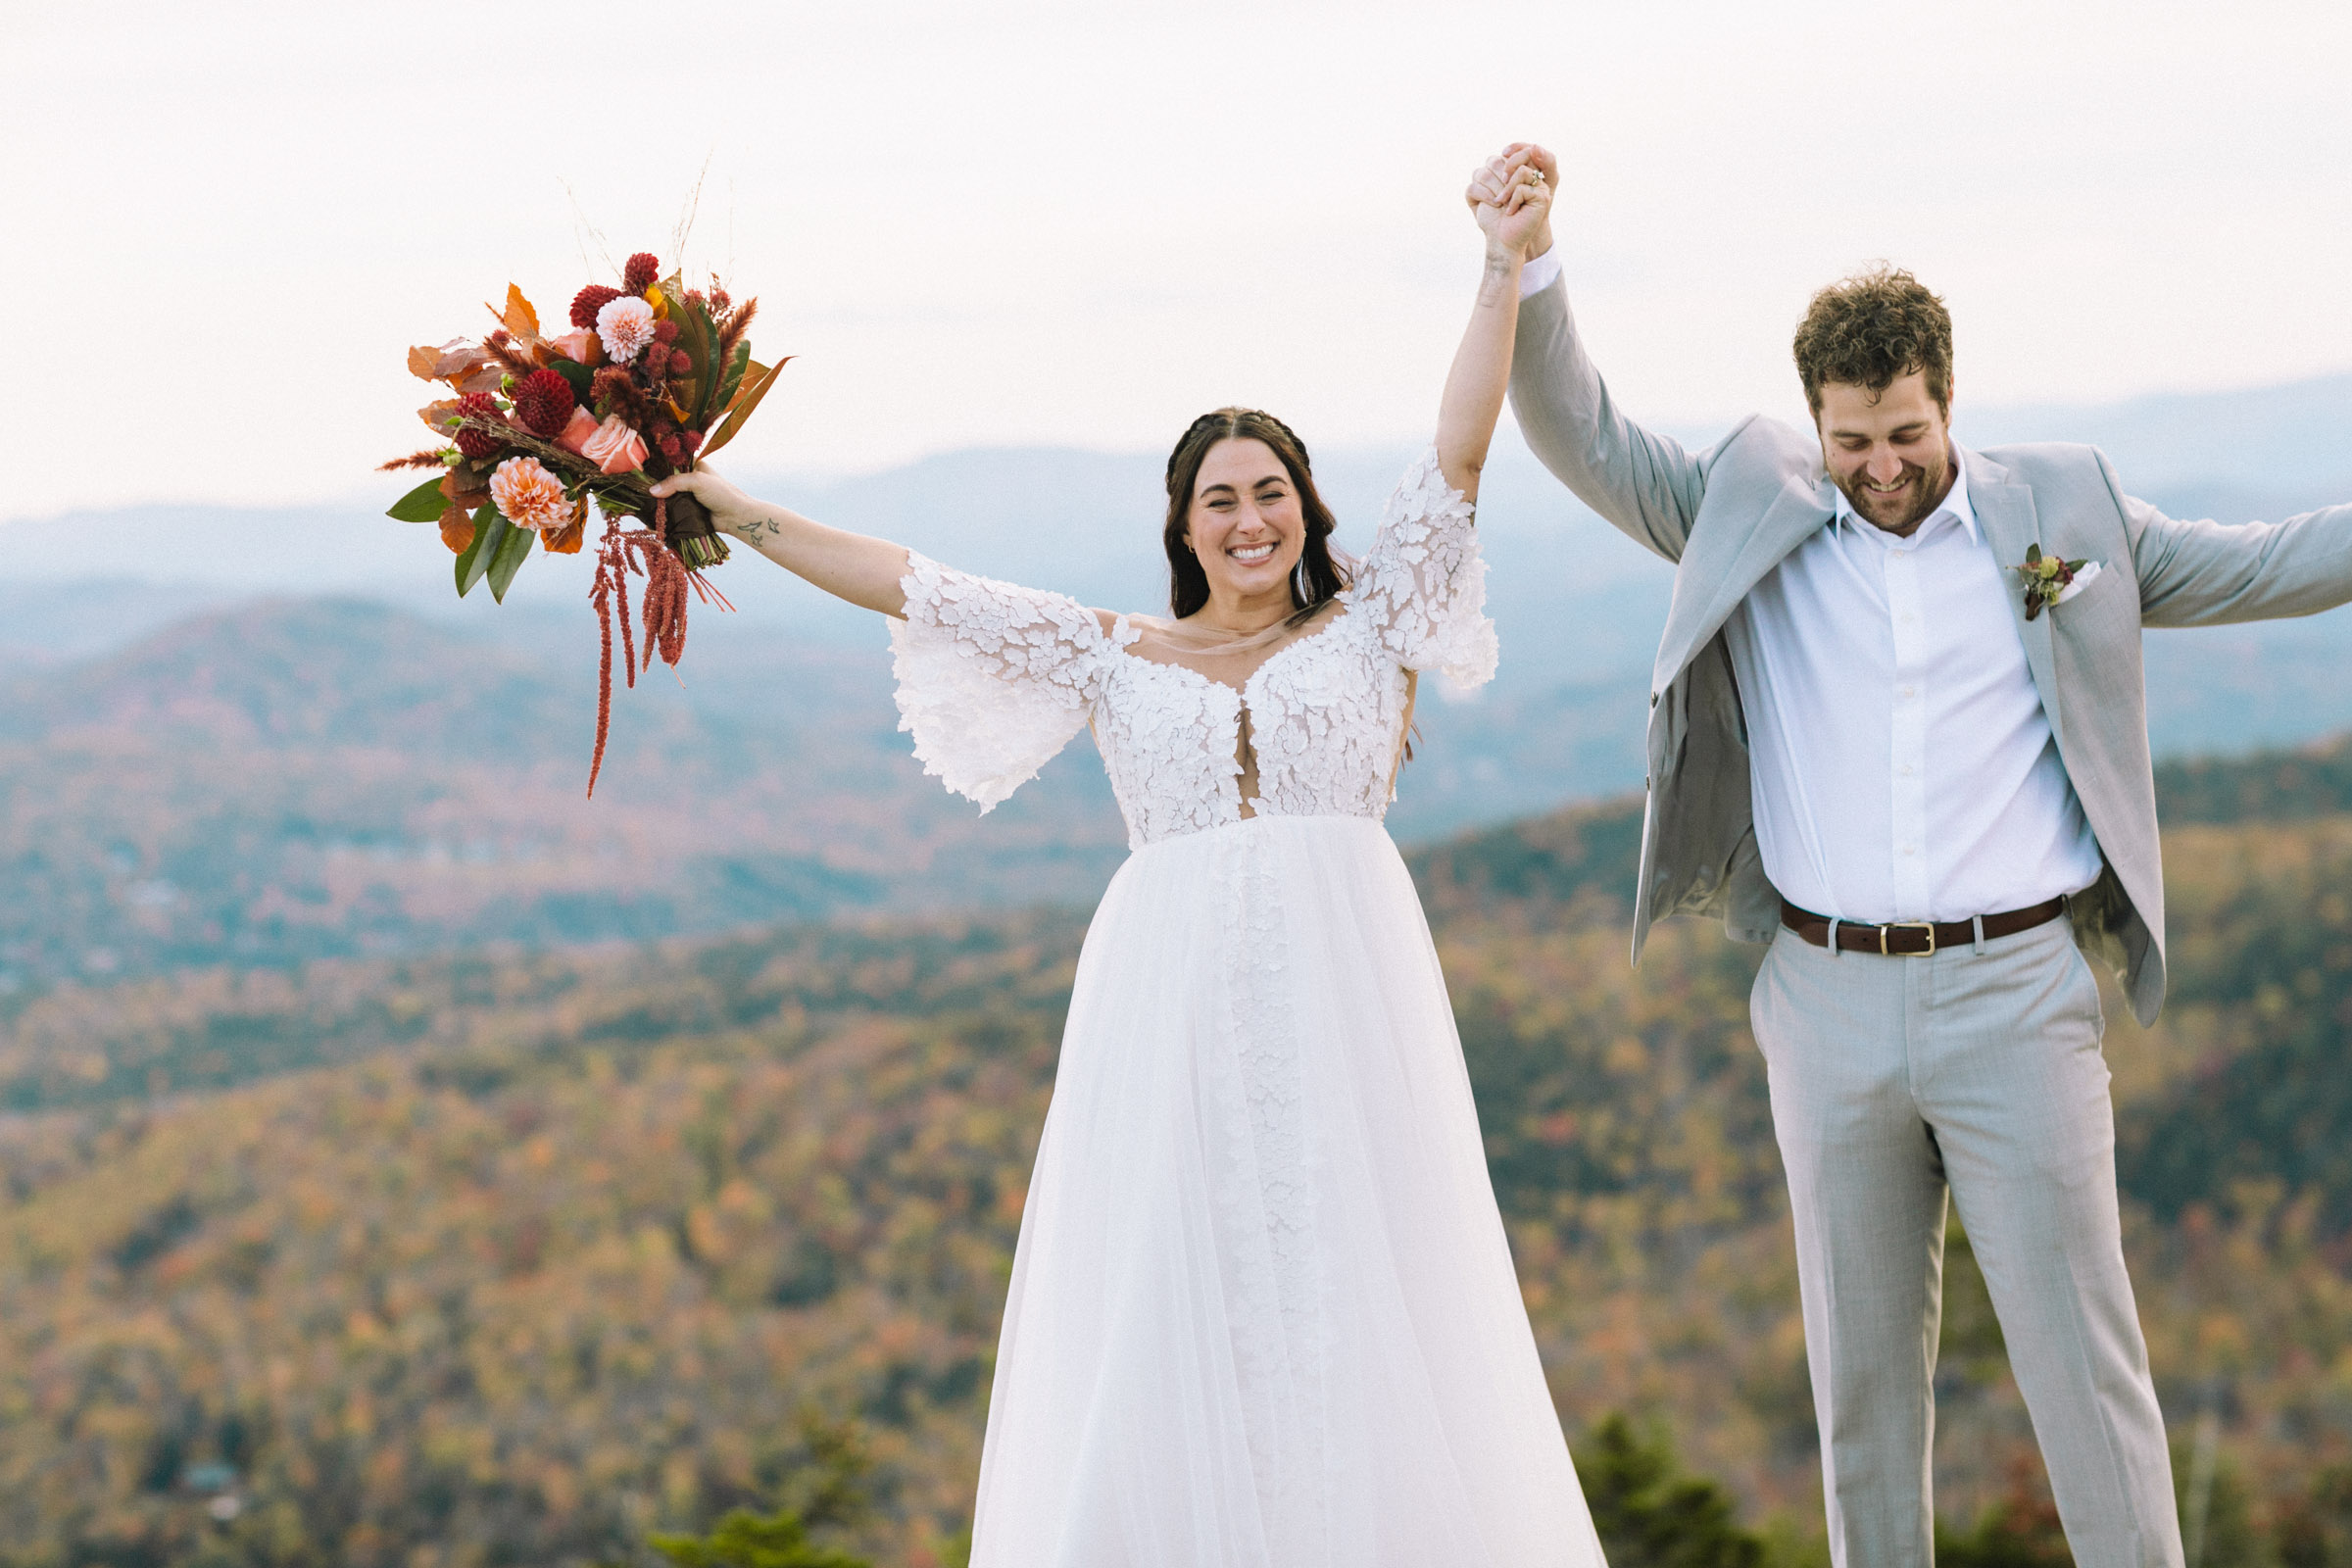 Bride and groom celebrate their union on their elopement day